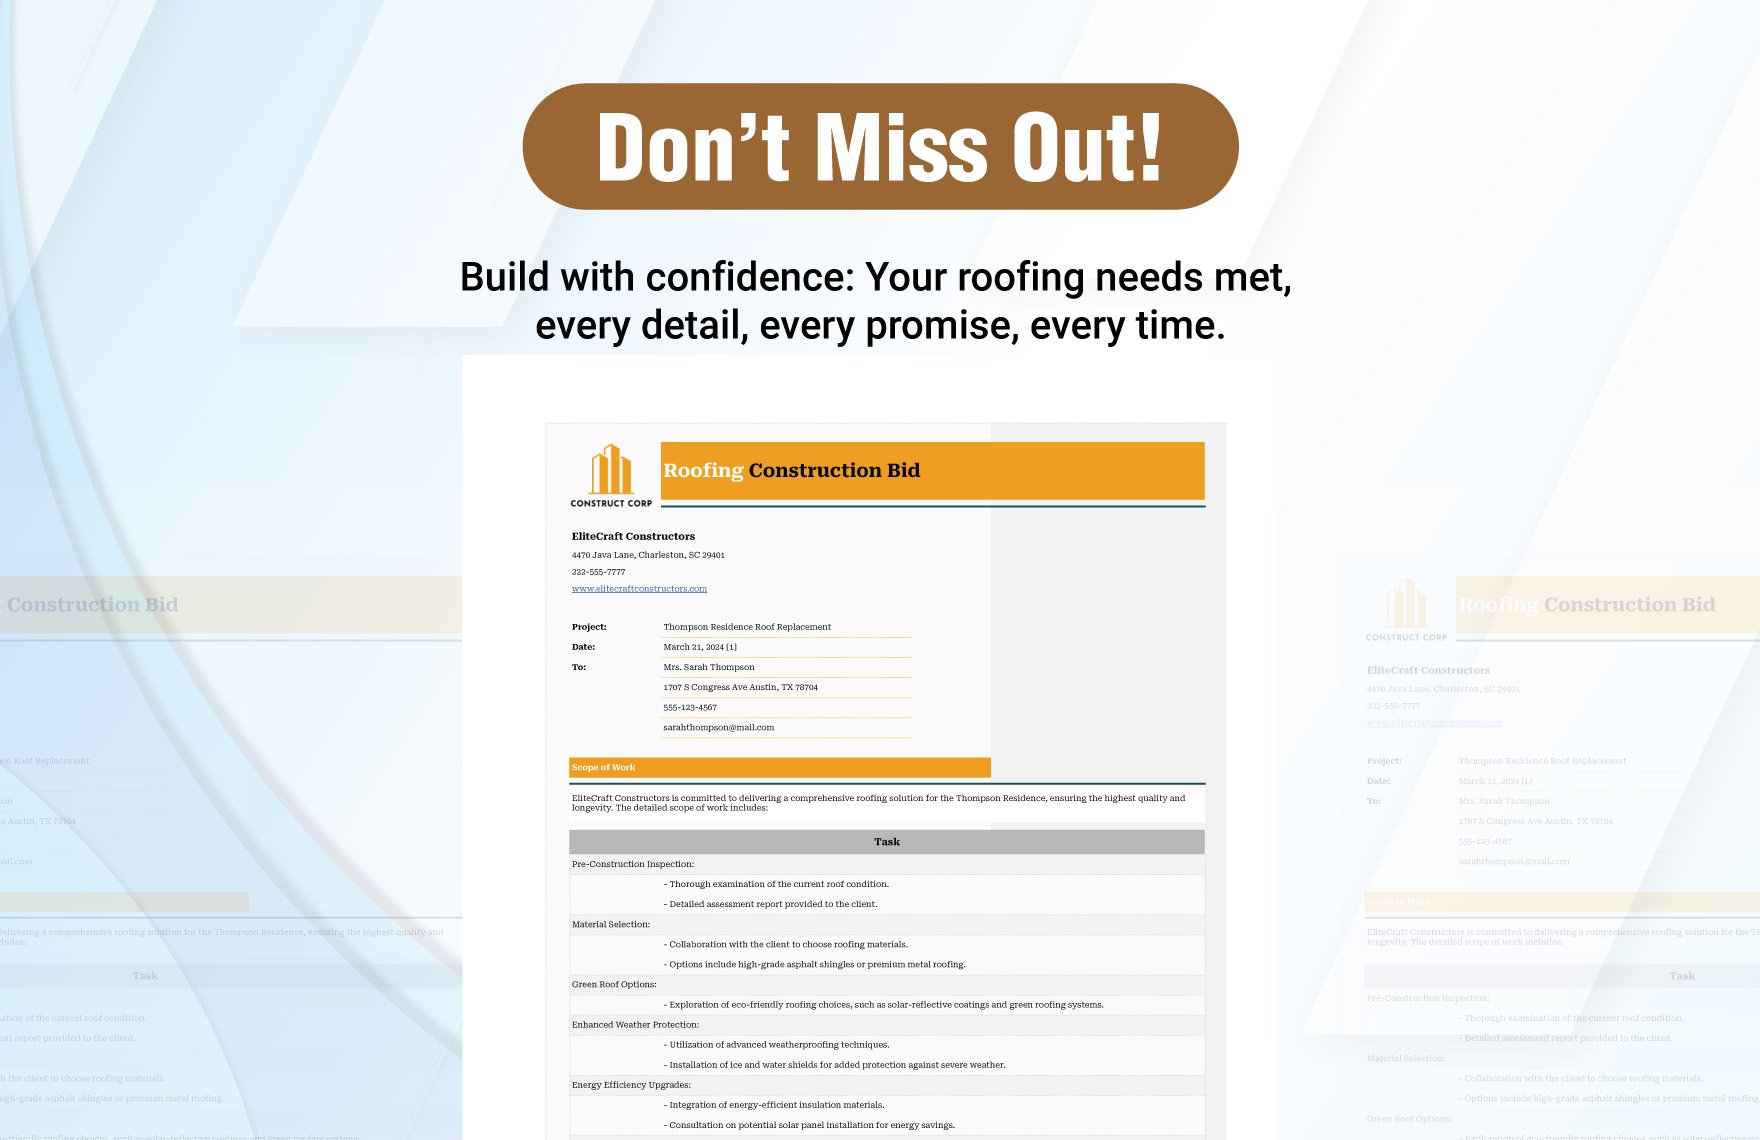 Roofing Construction Bid Template